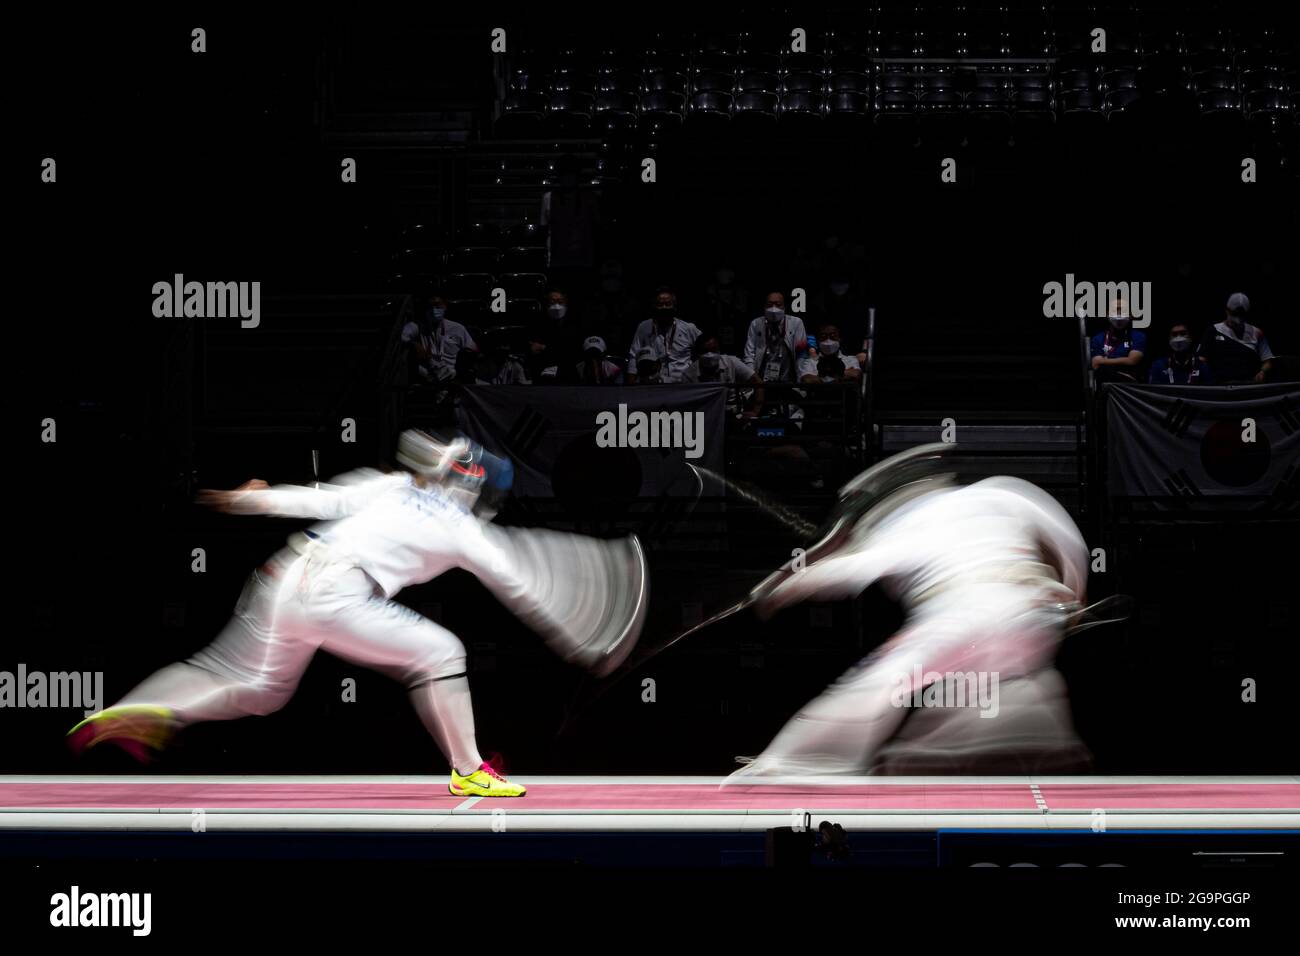 Tokyo, Japan. 27th July 2021. Olympic Games: Fencing, Estonia Team (W) wins gold medal against Korea at Makuhari Messe.    © ABEL F. ROS / Alamy Live News Stock Photo